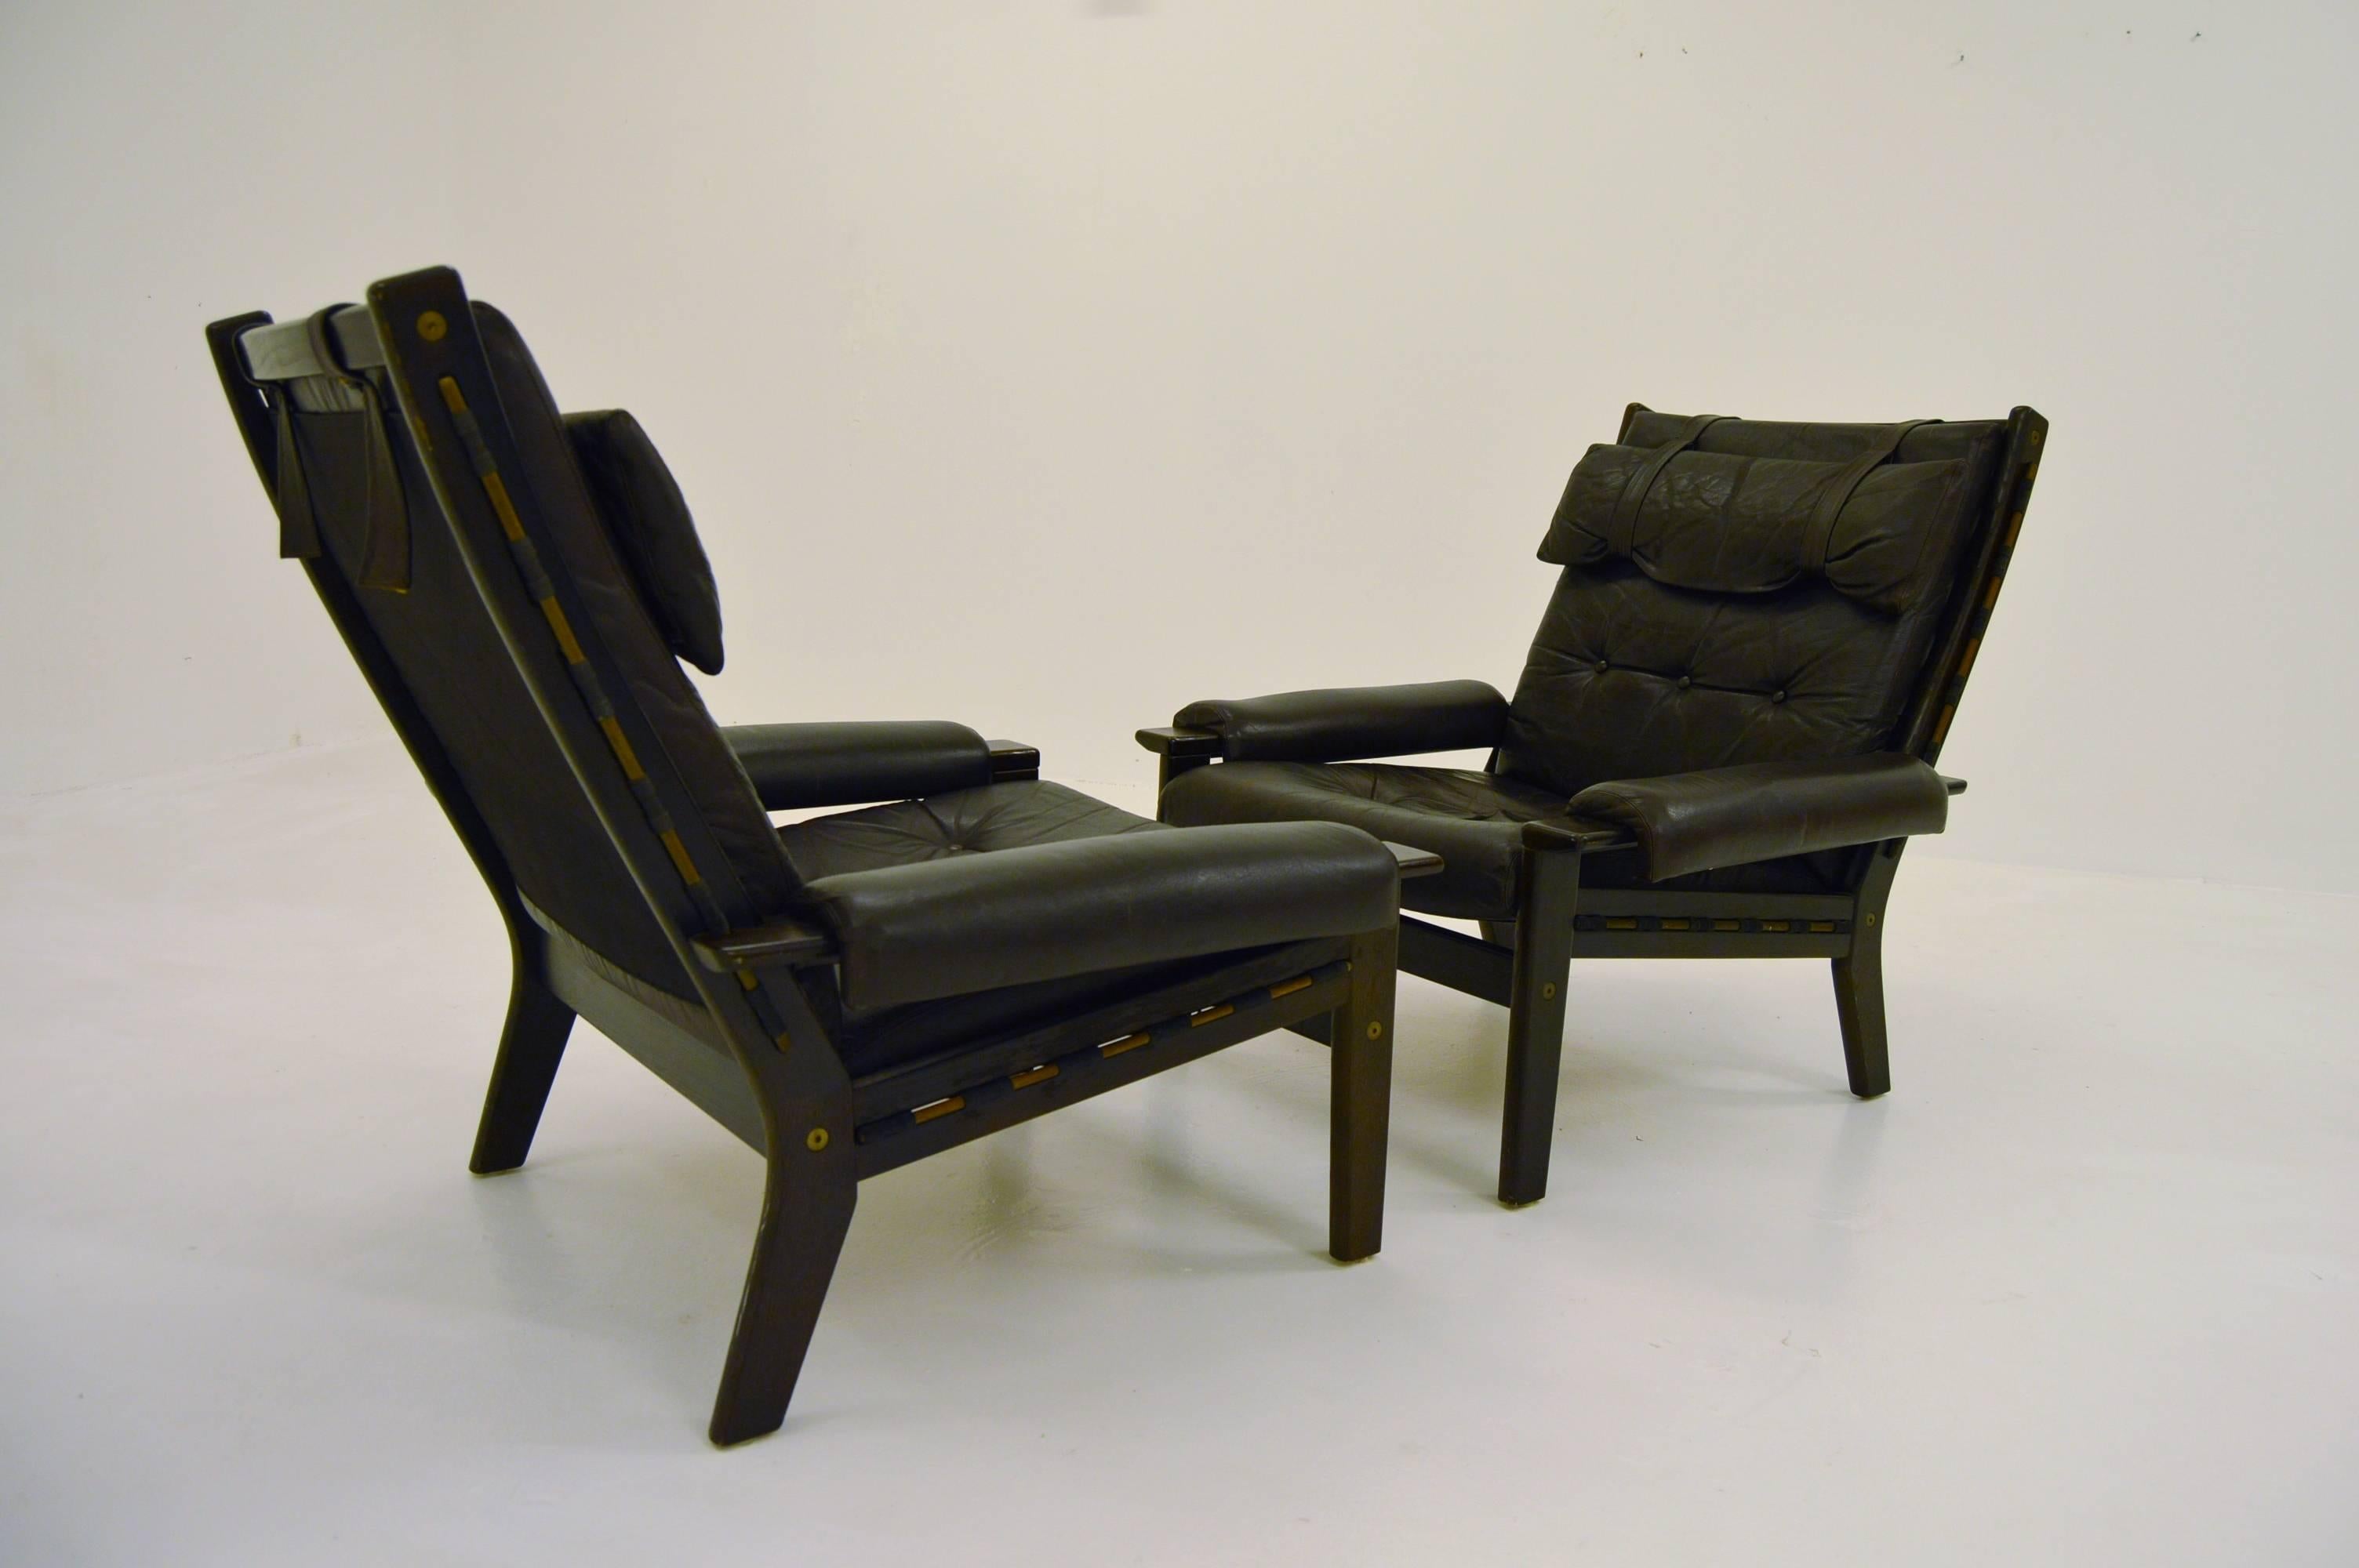 Nice and elegant pair of lounge chairs. Unknown designer and manufacturer. Most likely produced in Scandinavia during the 1970s.

Dark chocolate brown leather and wood that appears to be wenge.

Very good vintage condition.